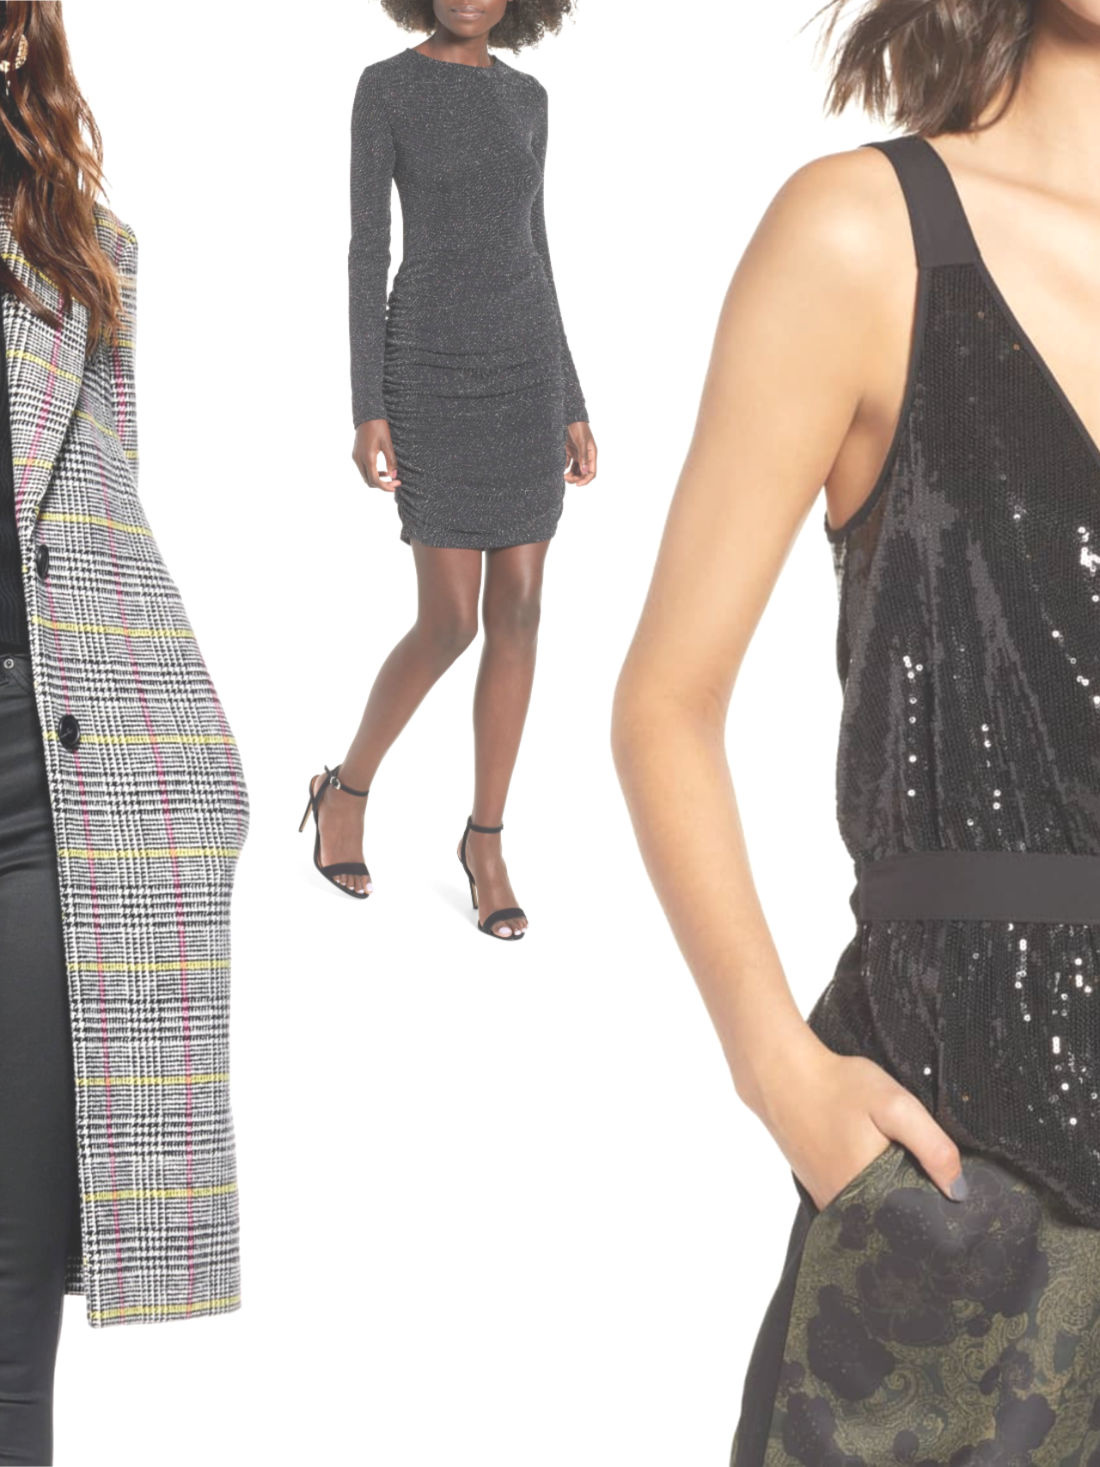 shop new years eve outfits